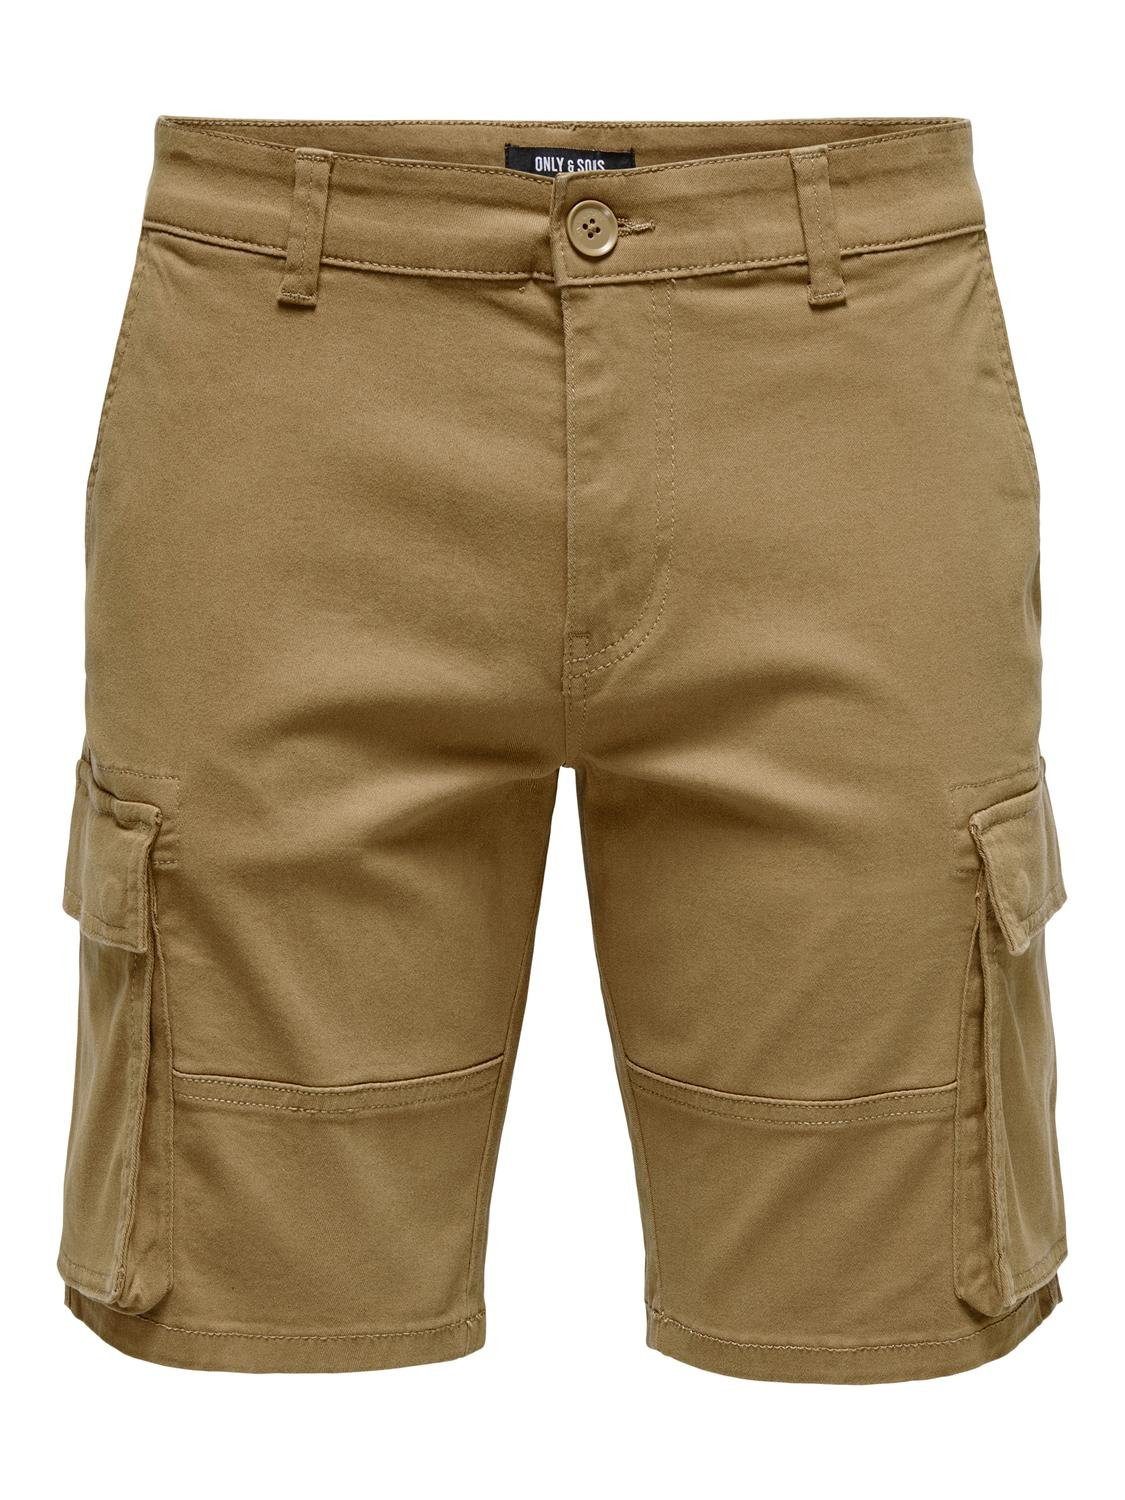 ONLY & SONS Cargoshorts Cargo Shorts Pants Lässige Sommer Hose 7345 in Braun